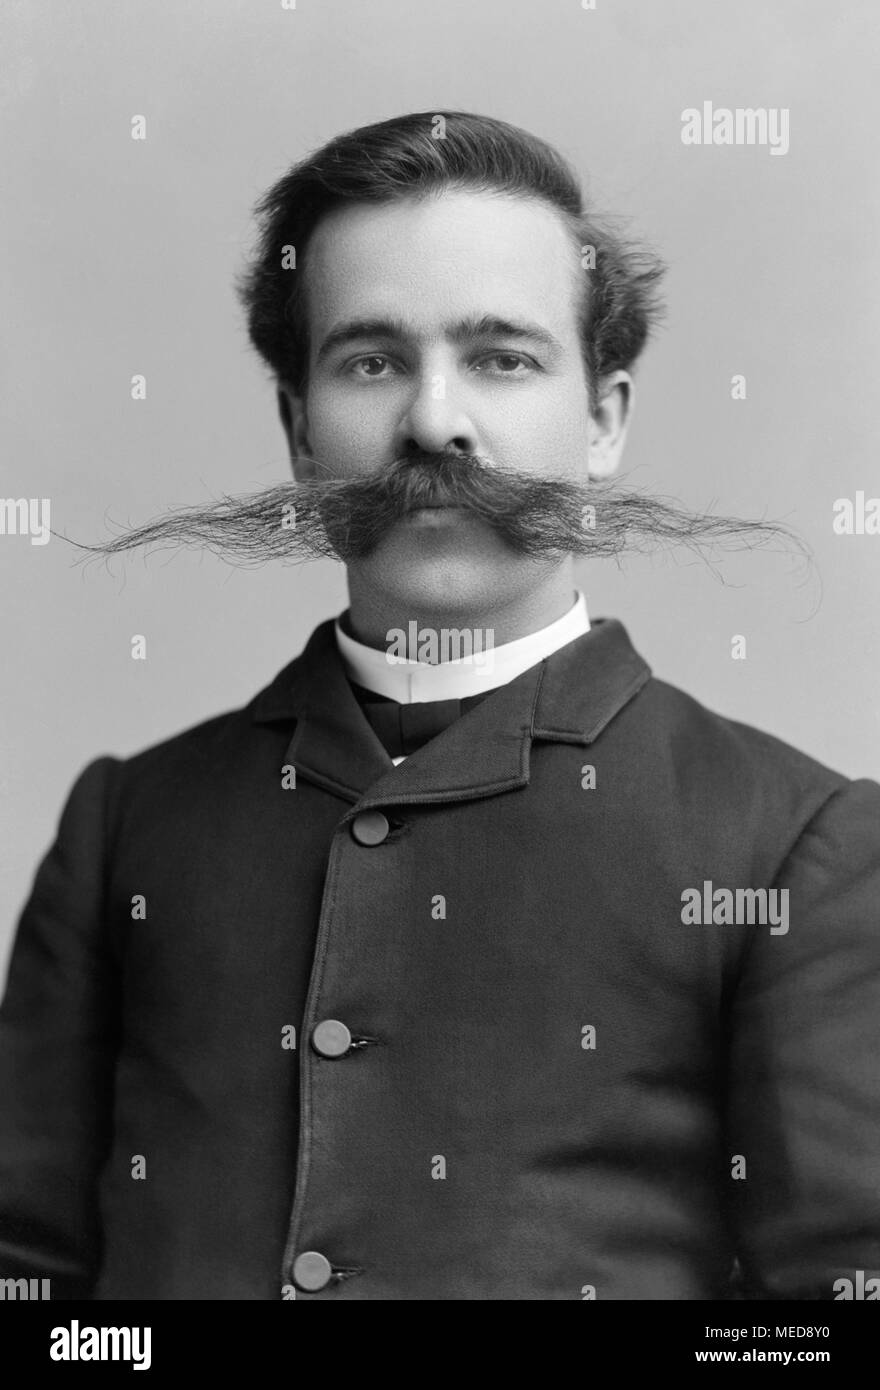 19th Century man, George B. Miles, with extremely wide mustache. Photo c1891 by C.M. Bell. Stock Photo